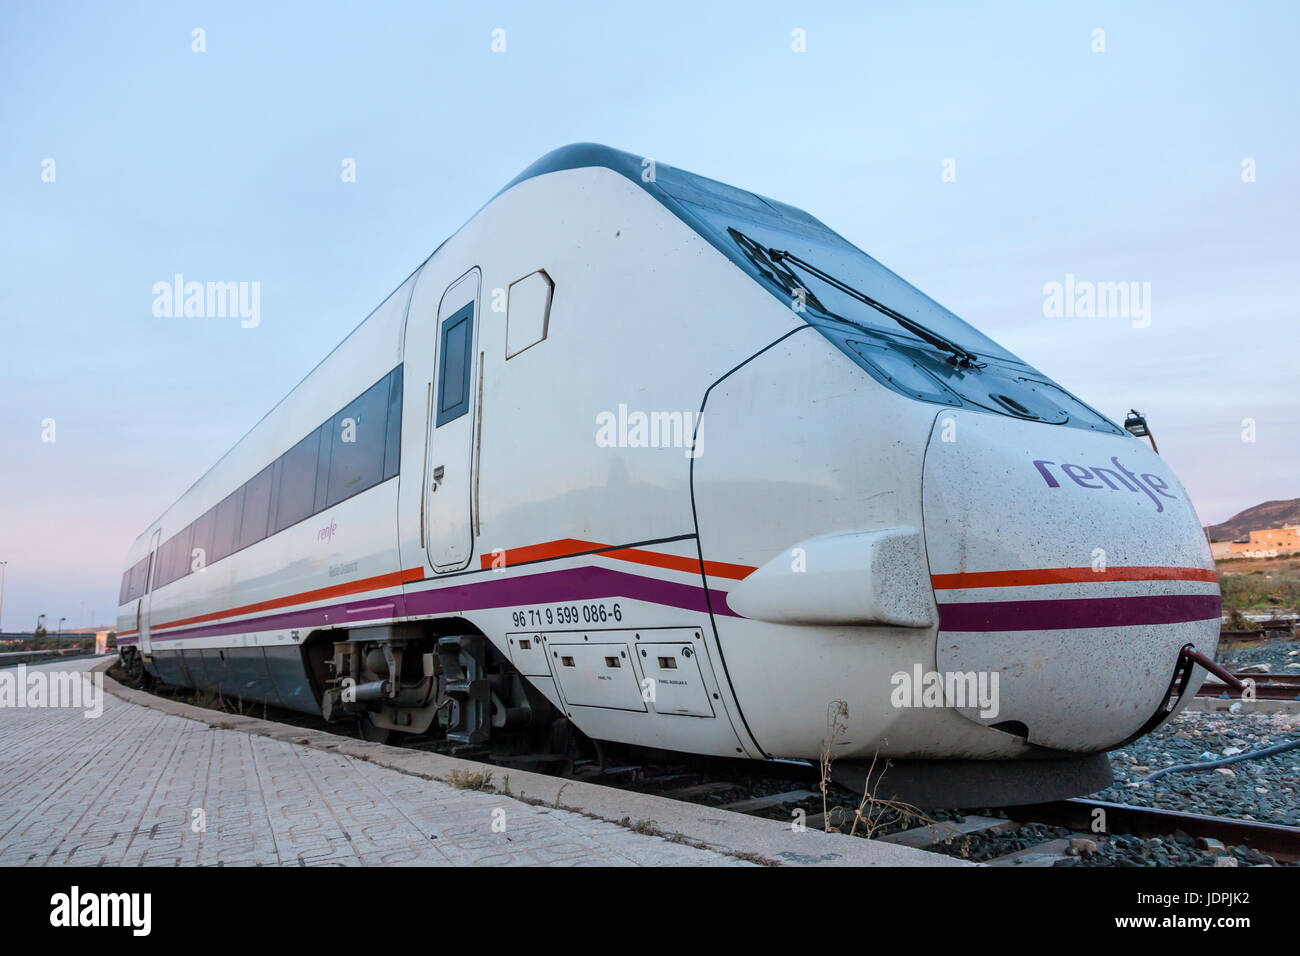 Cartagena, Spain - May 17, 2017: Modern passenger train at the central station in Cartagena, region of Murcia, Spain Stock Photo